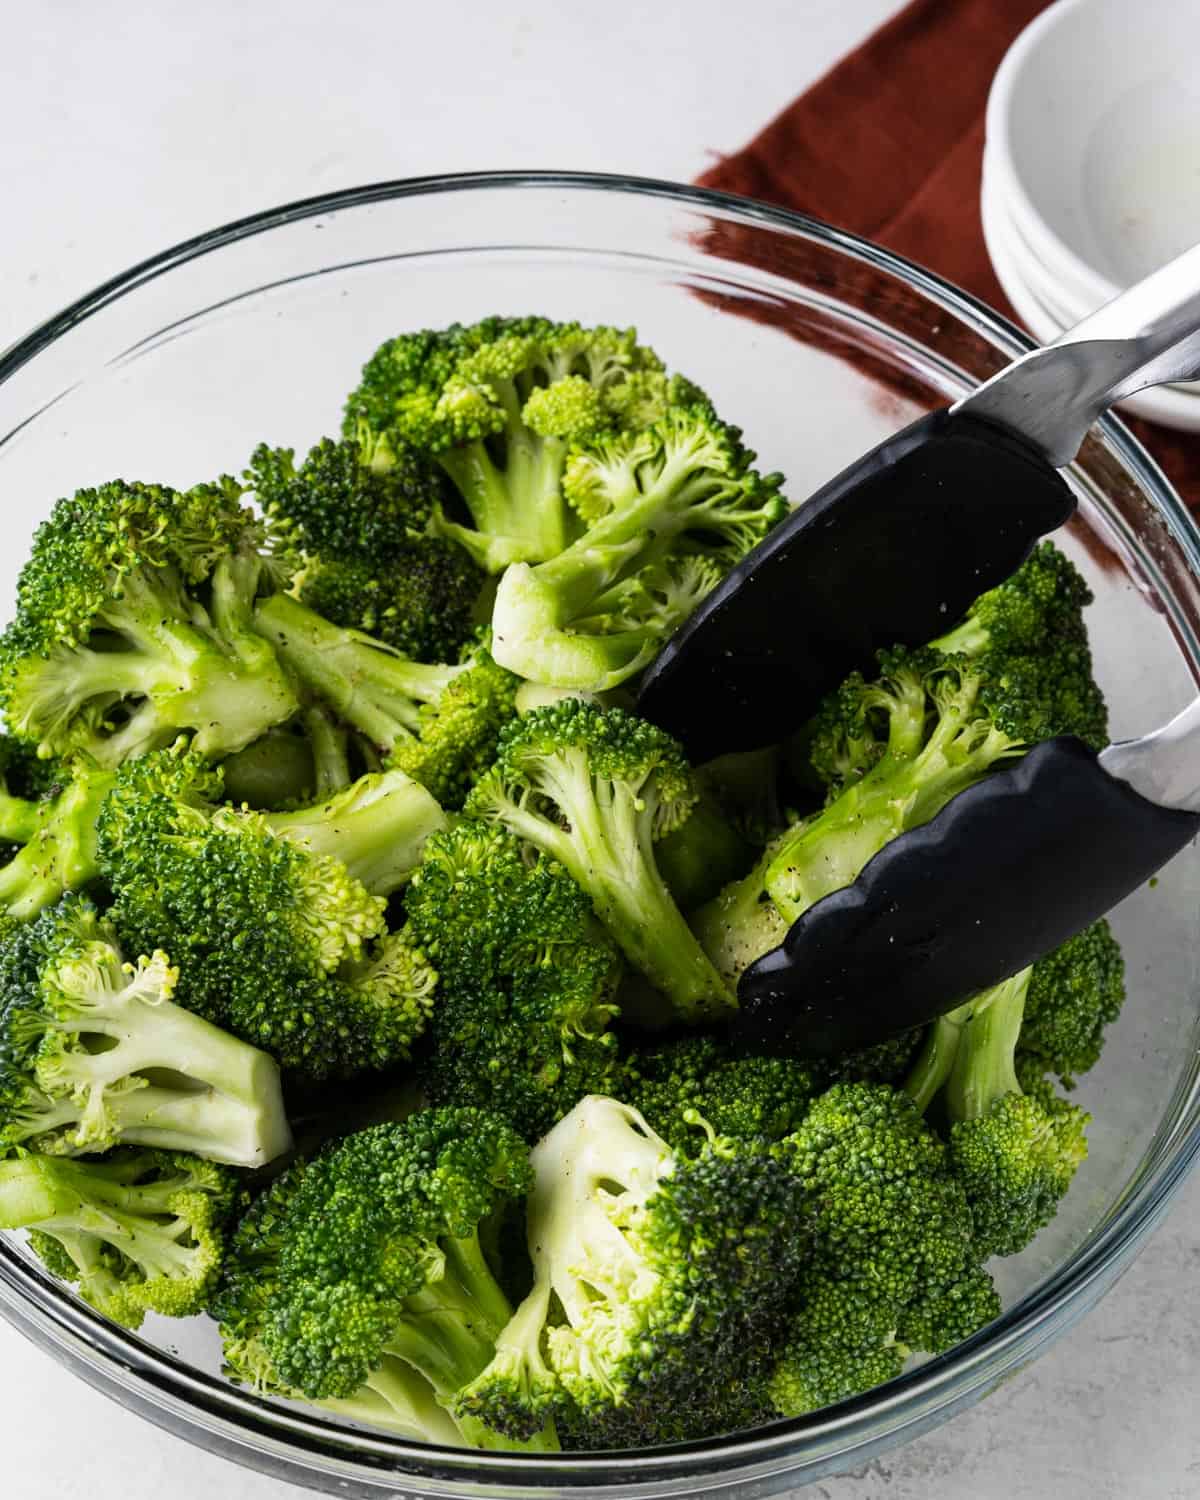 Mixing air fryer broccoli ingredients together